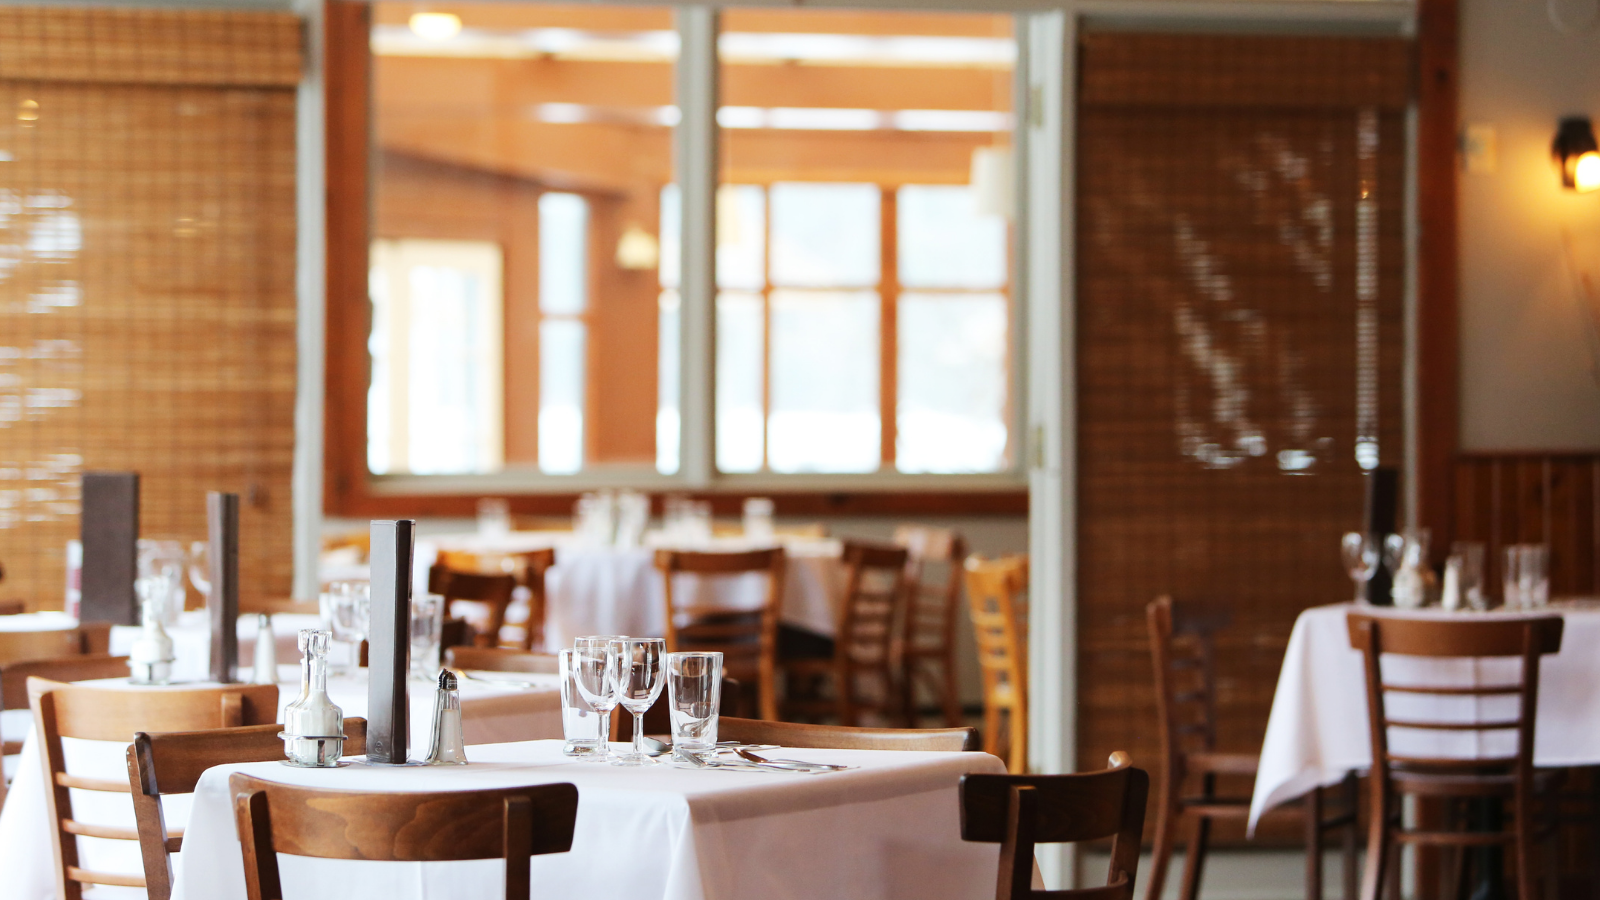 The Benefits of Using Restaurant Checklists [Infographic]